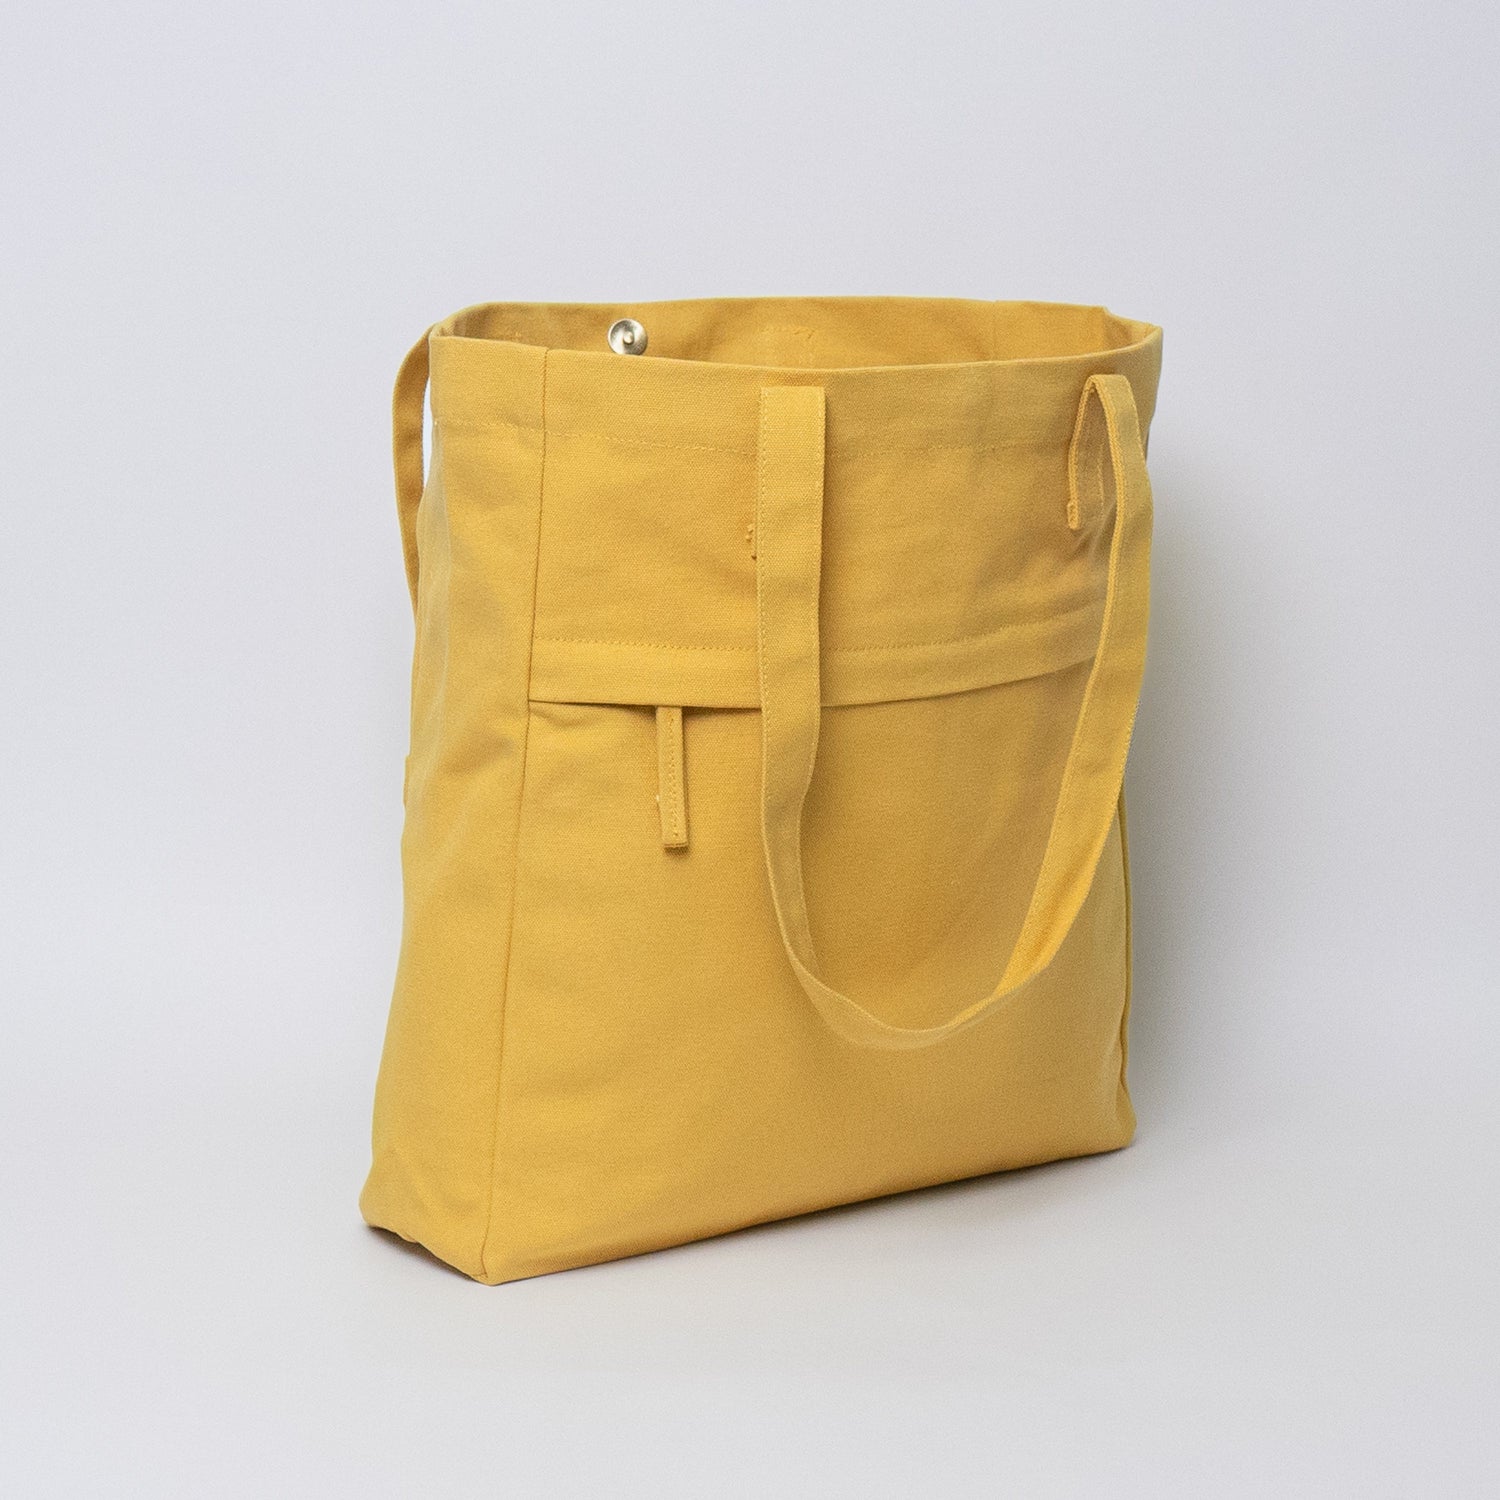 Acquisition Work Tote